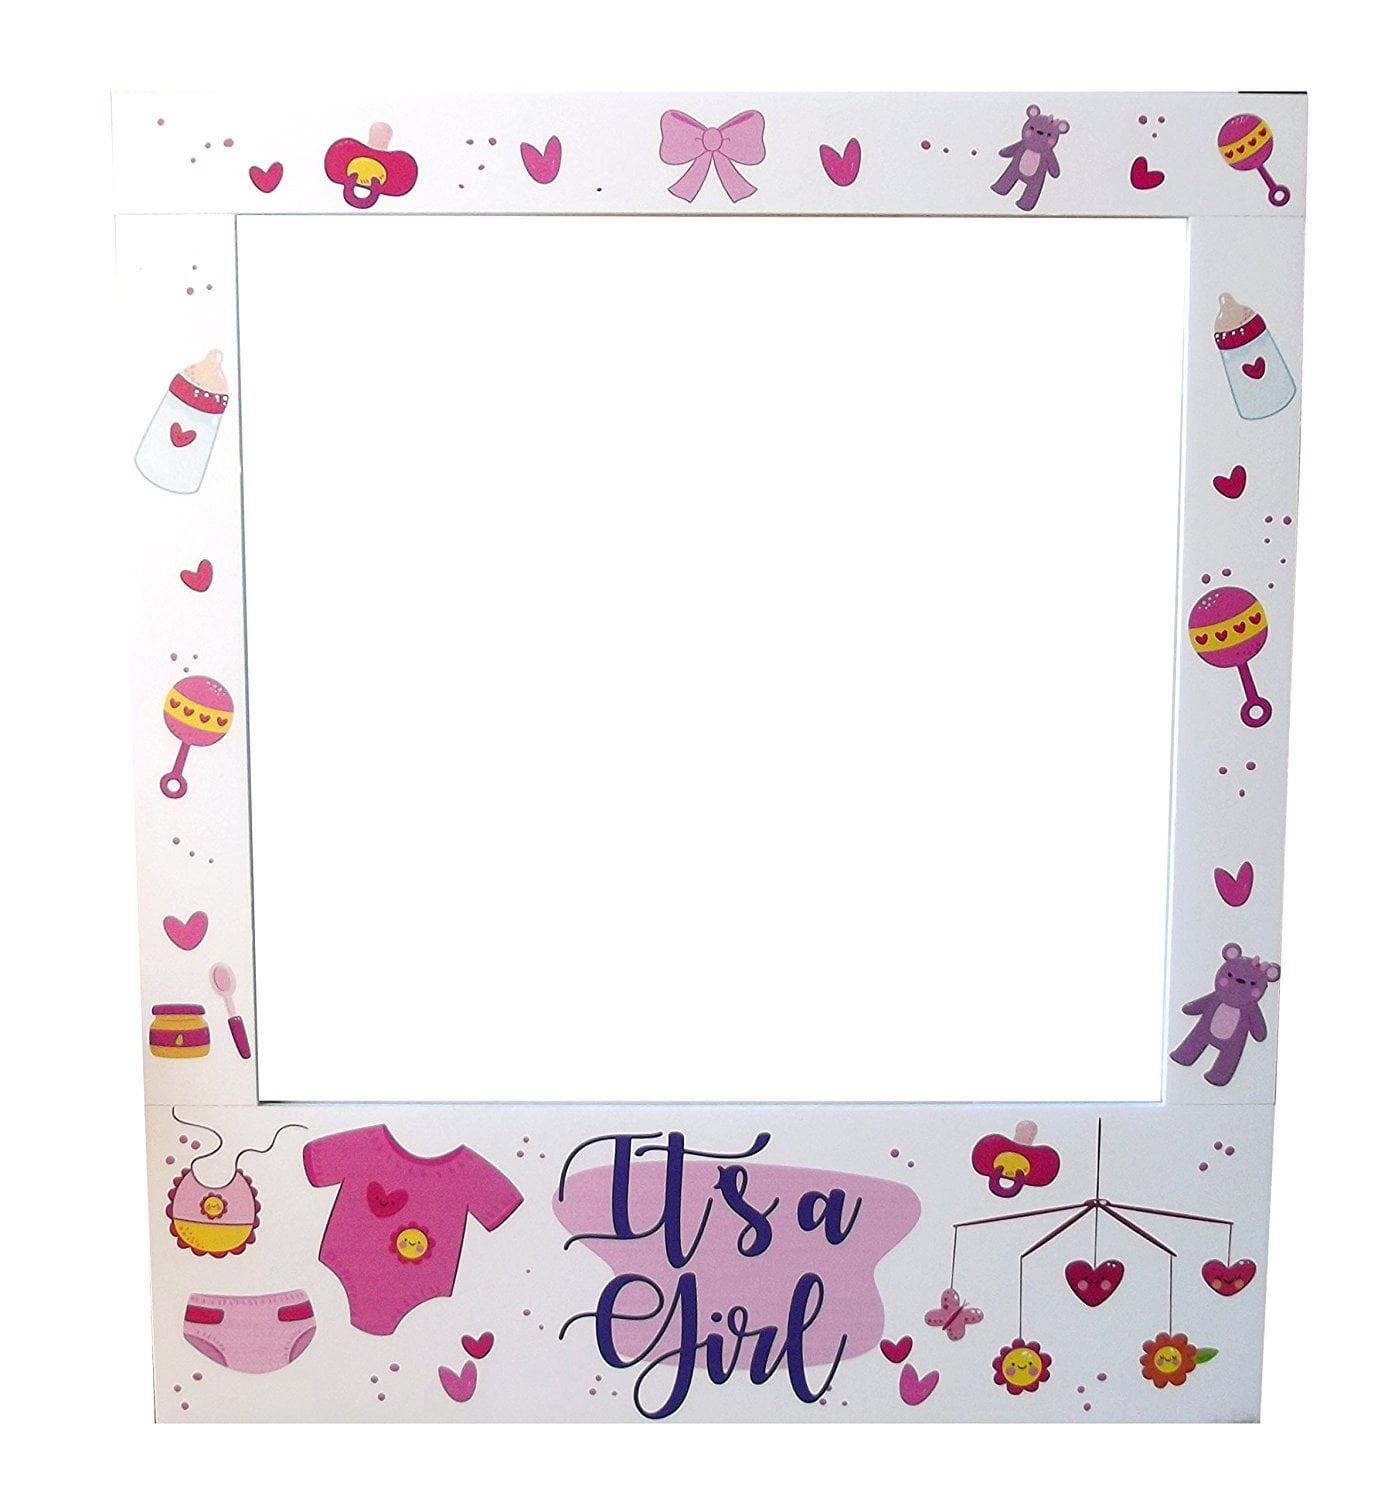 Details about   Aahs Engraving Valentine's Day Party Frame Photo Prop 35 X 30 inches